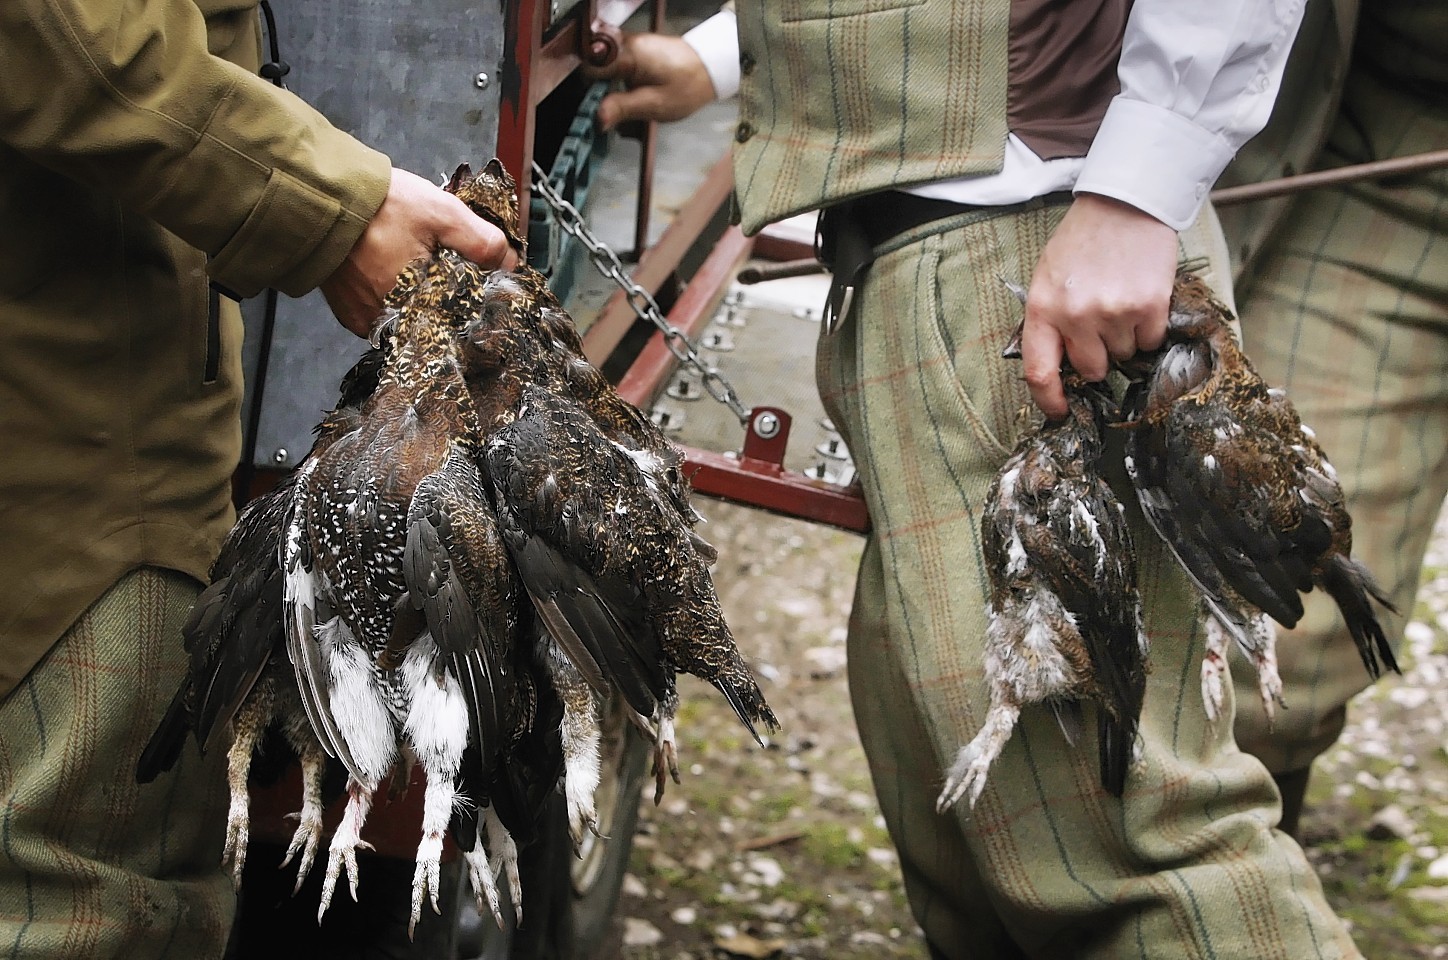 A bid to ban grouse shooting has caused controversy.